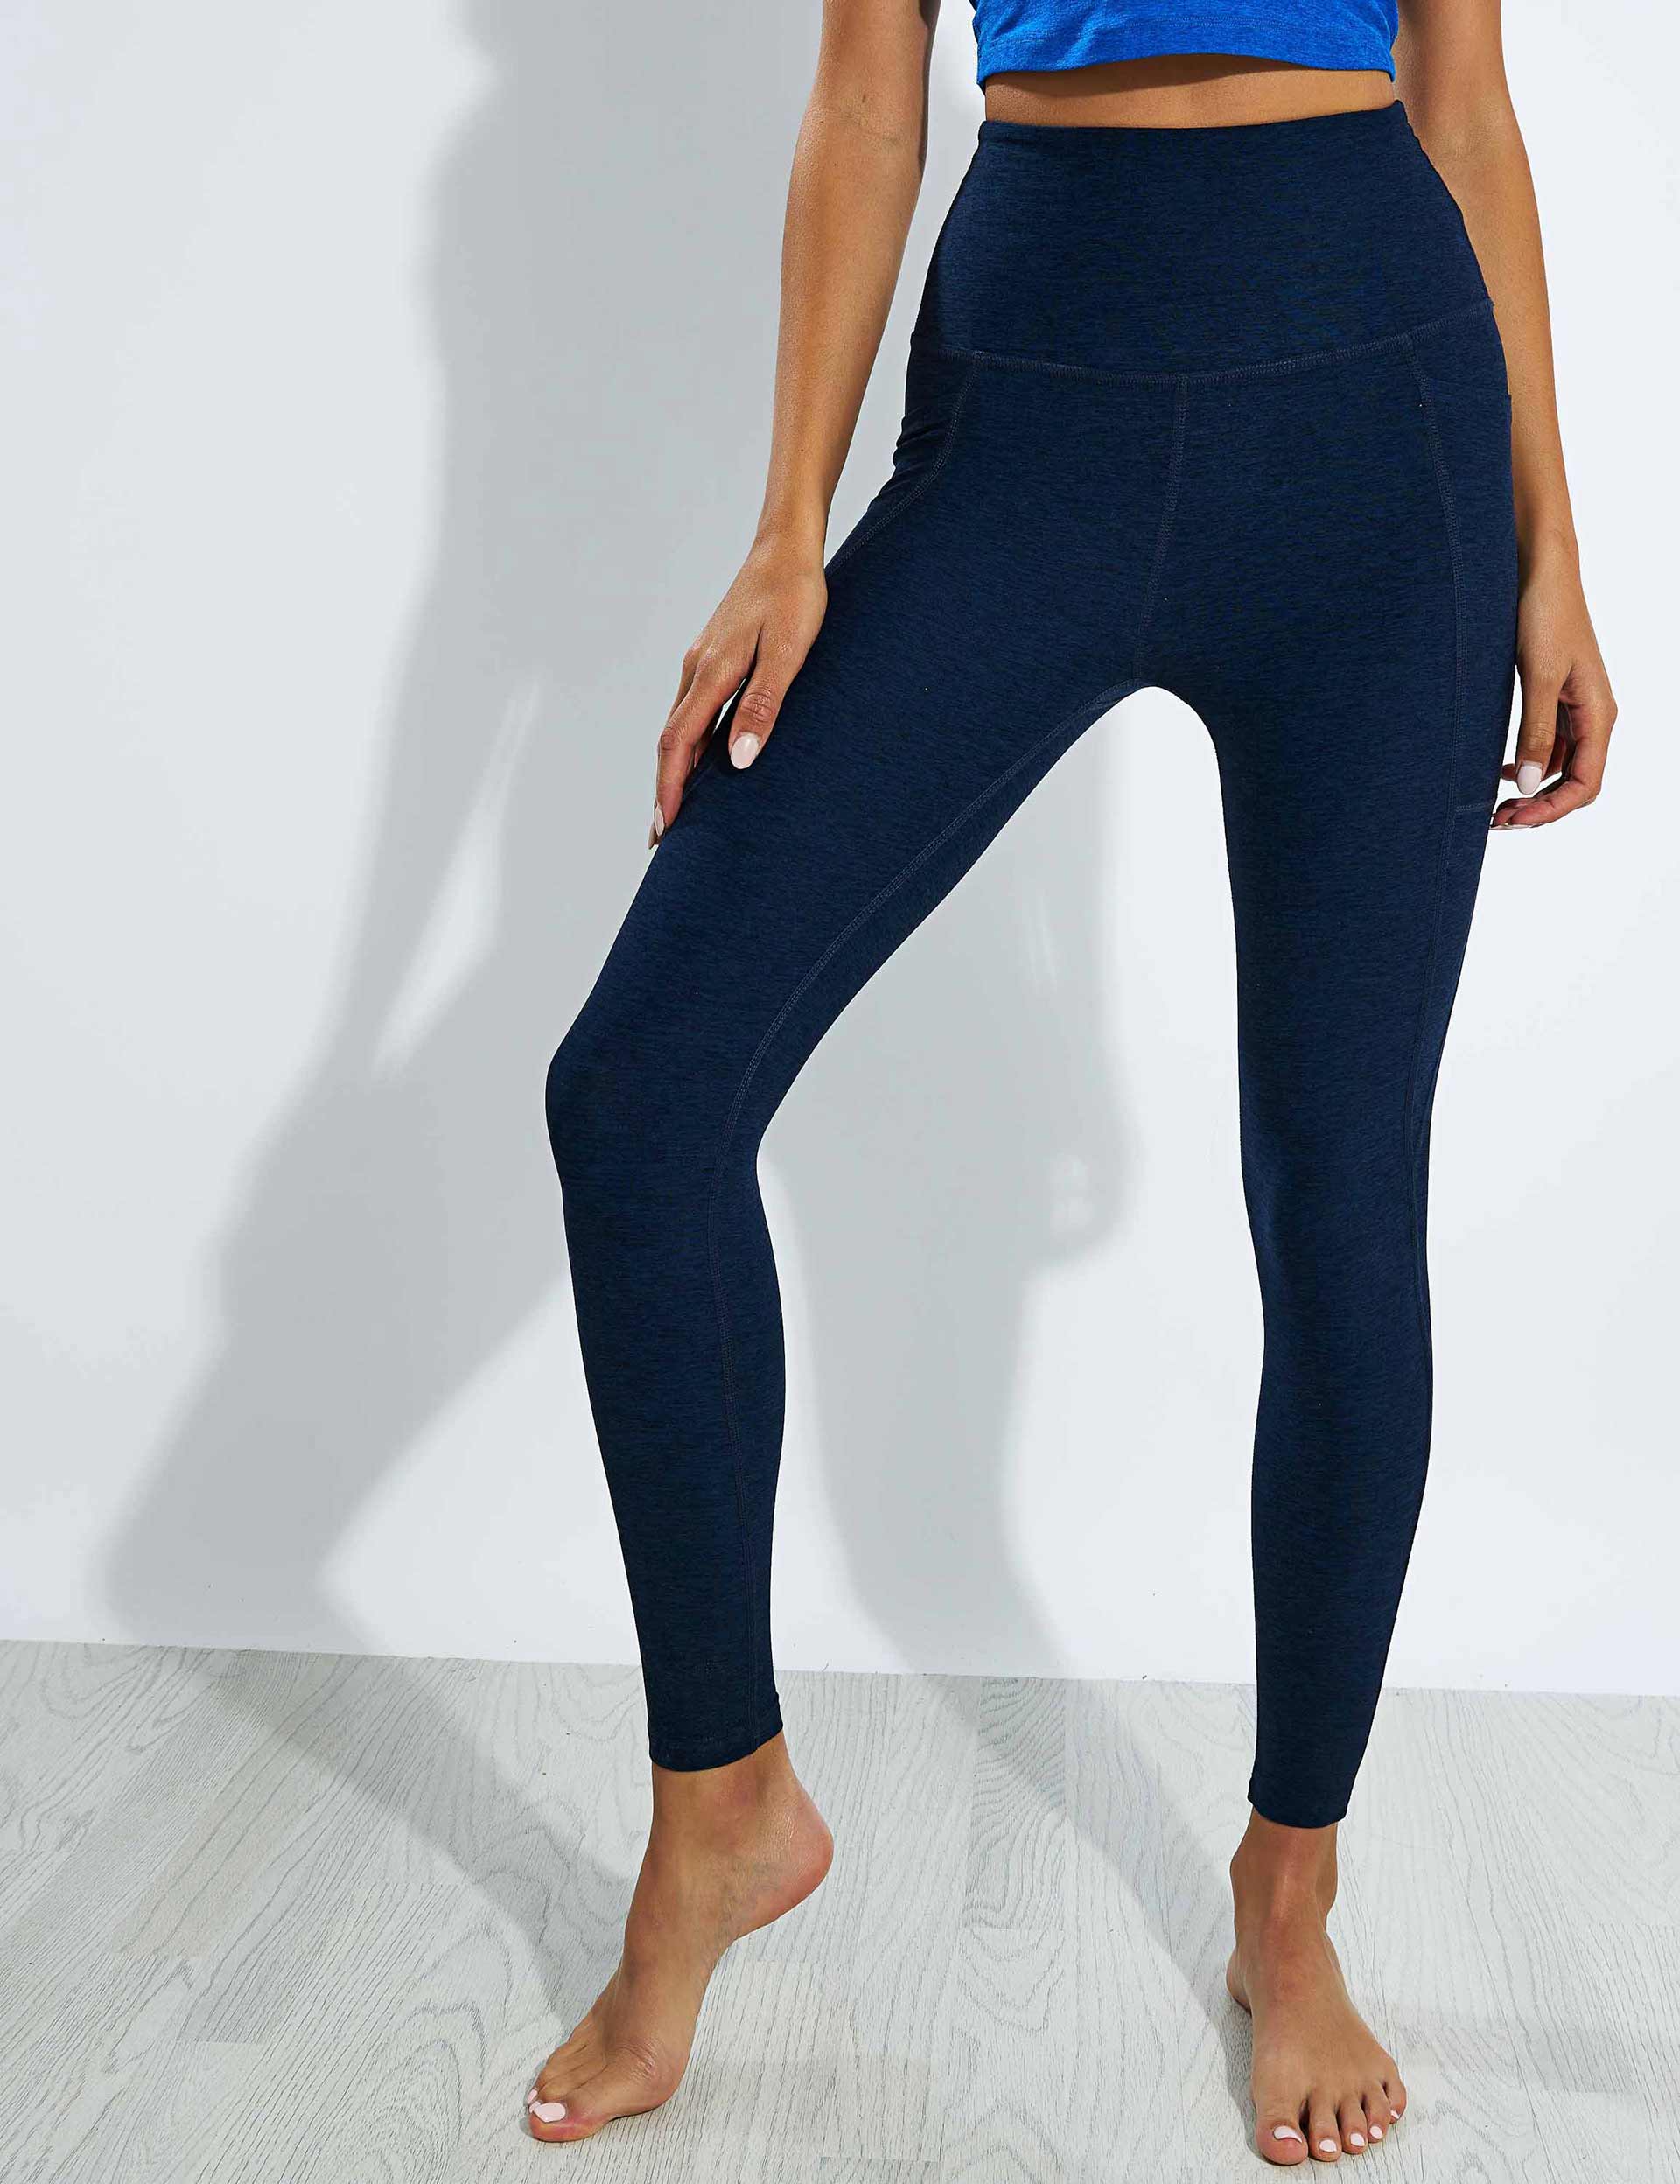 Urban Outfitters Beyond Yoga Space-Dye Out Of Pocket High-Waisted